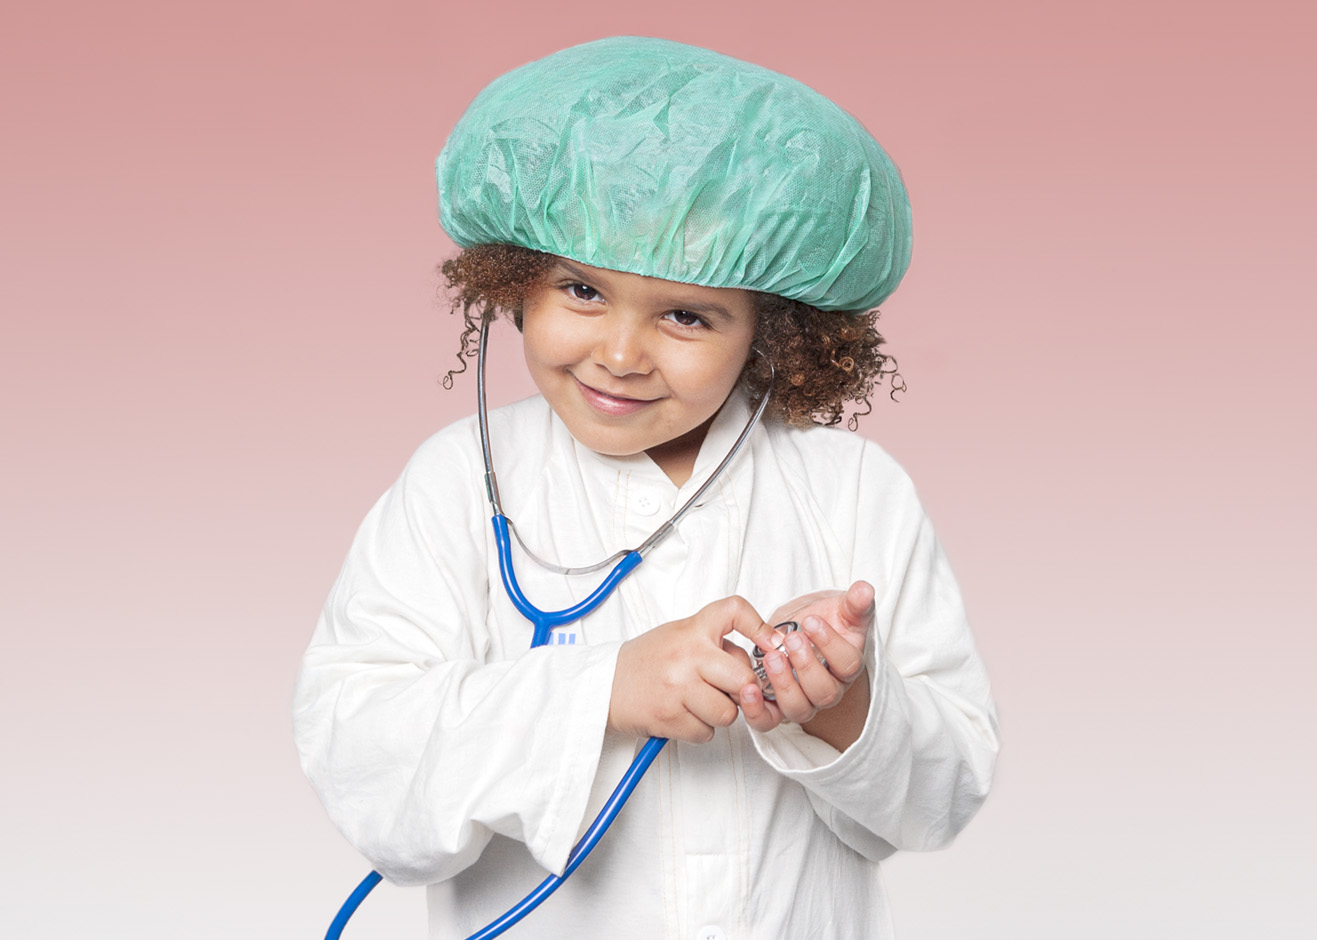 Girl wearing a green scrub cap is listening with a stethoscope.